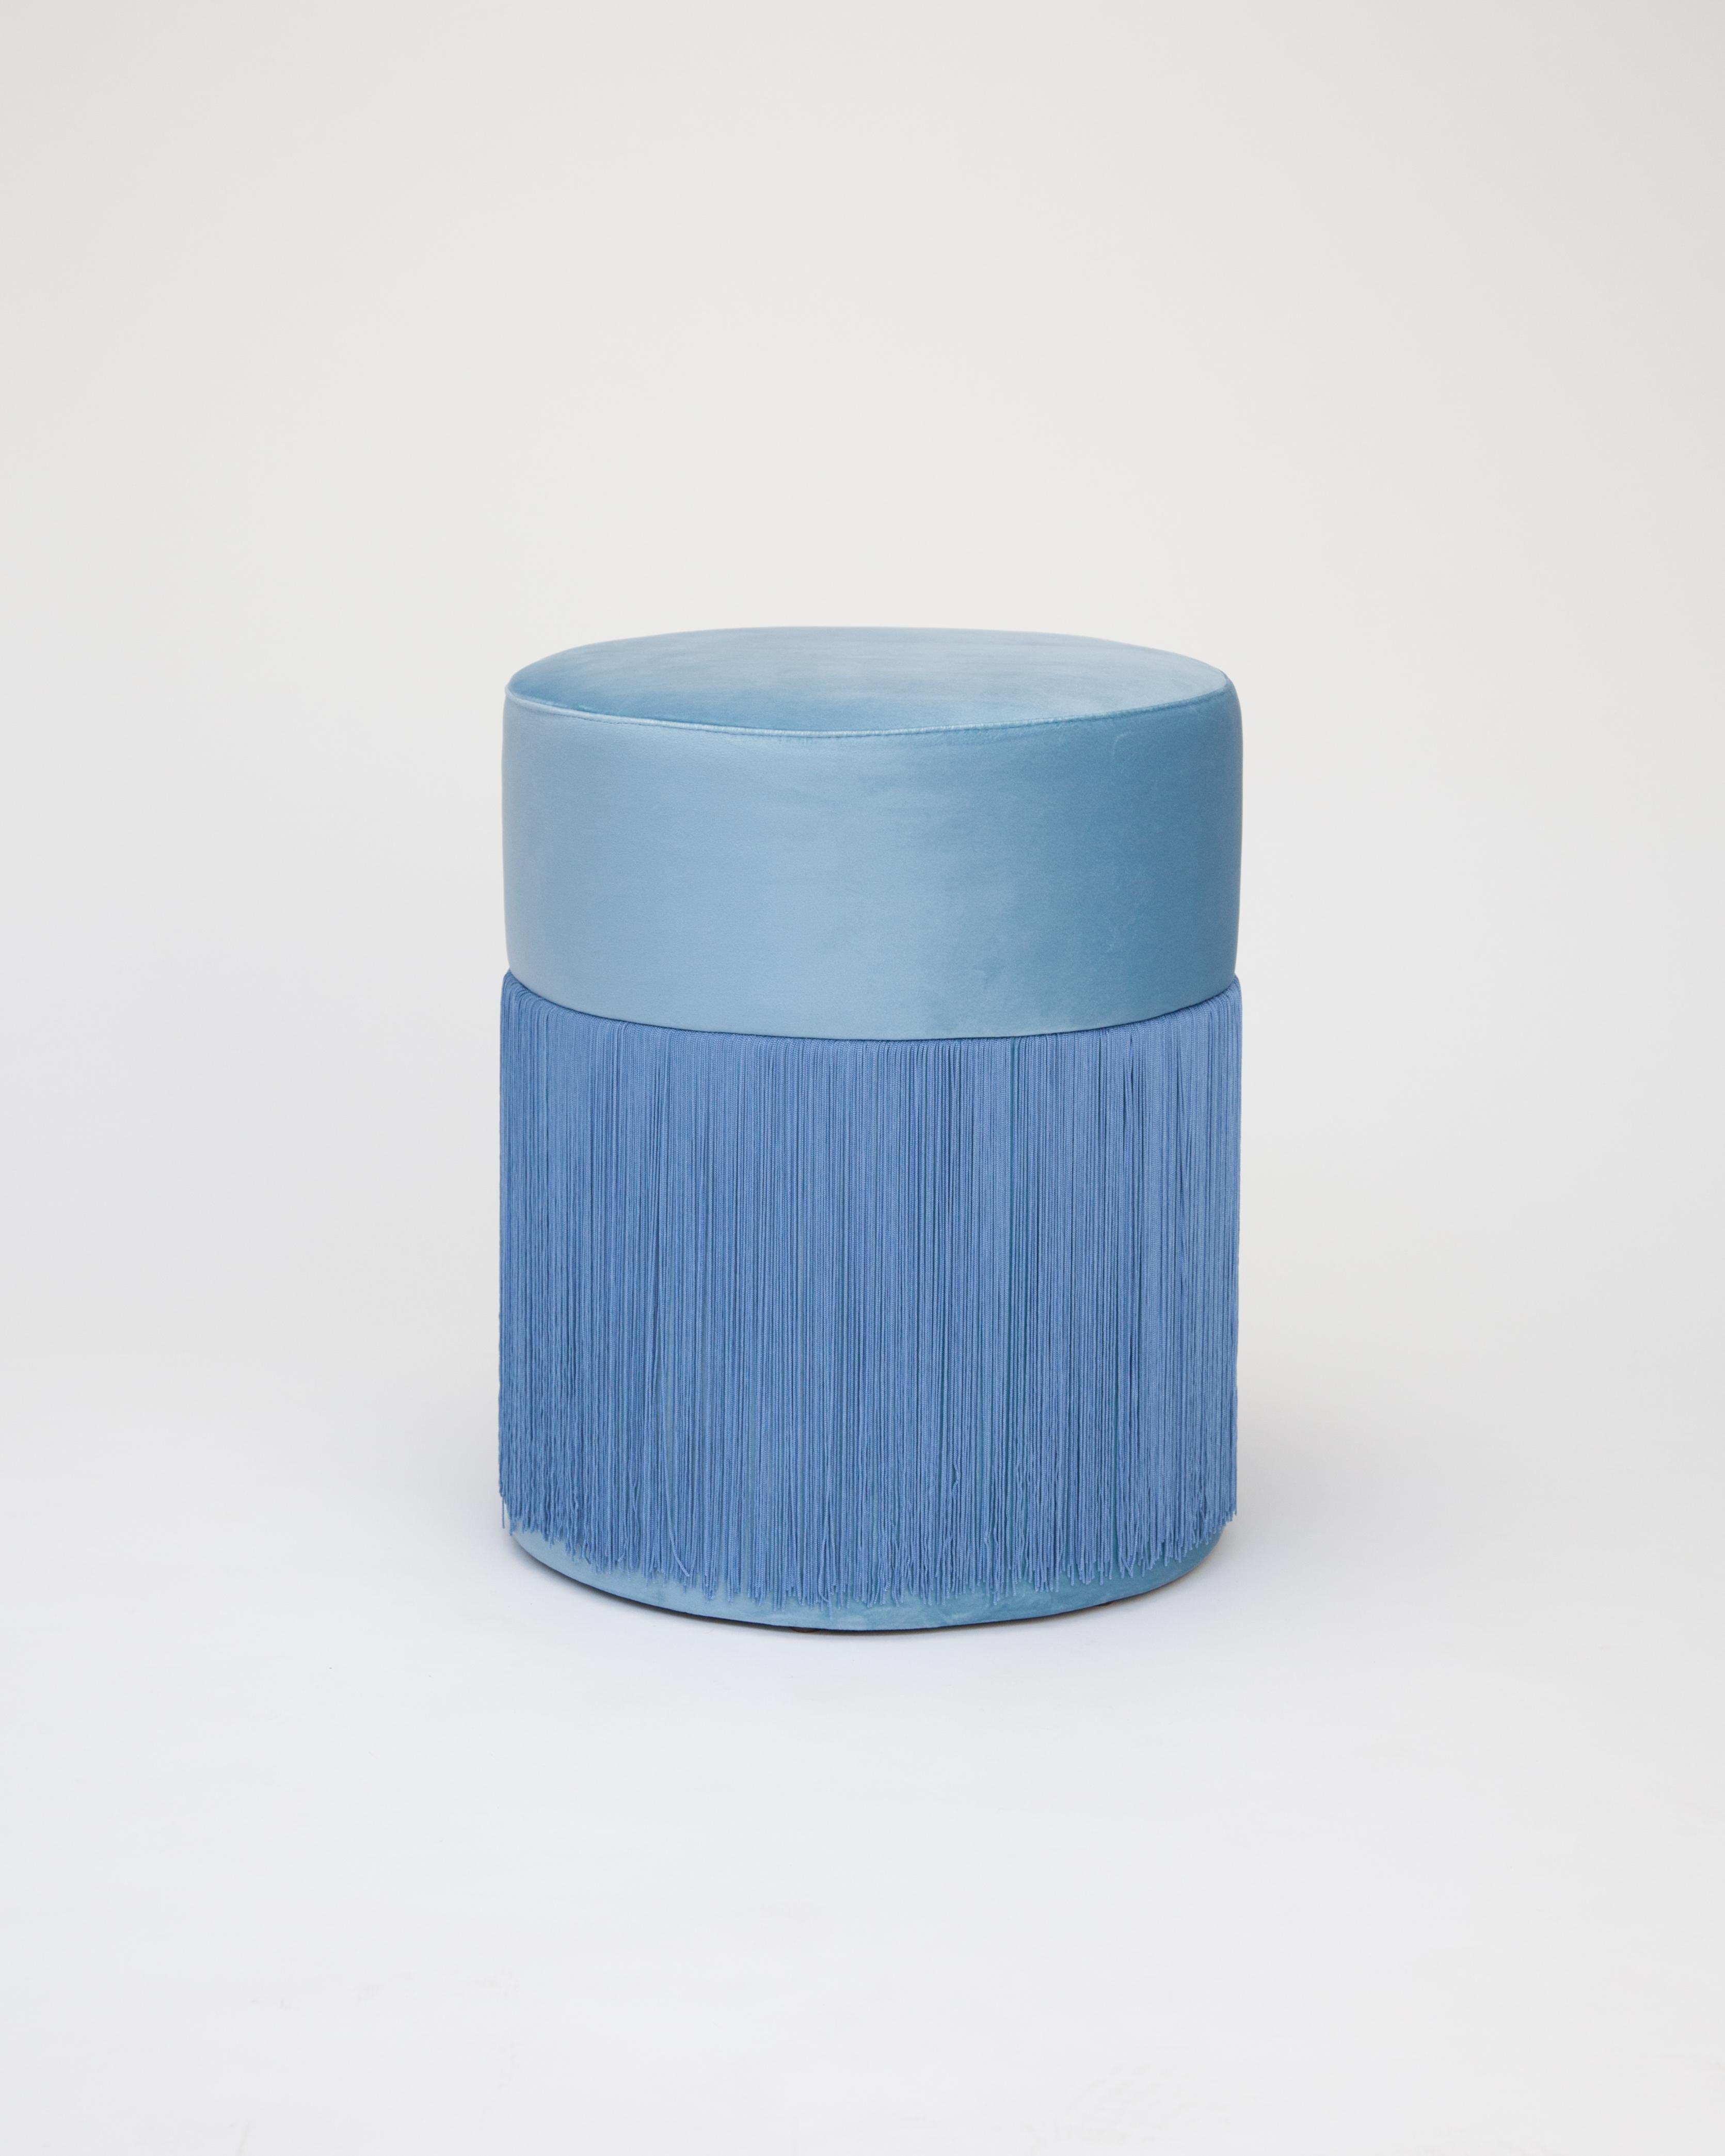 Pouf pill S by Houtique
Dimensions: H 45 x D 35 cm
Materials: Velvet upholstery and 30cm fringes

Pill Pouf S
Art Deco style pouf with wood structure and velvet fabric.
2 fiber-board discs of 16mm, joined by wooden tufts.
Upholstery velvet 100%